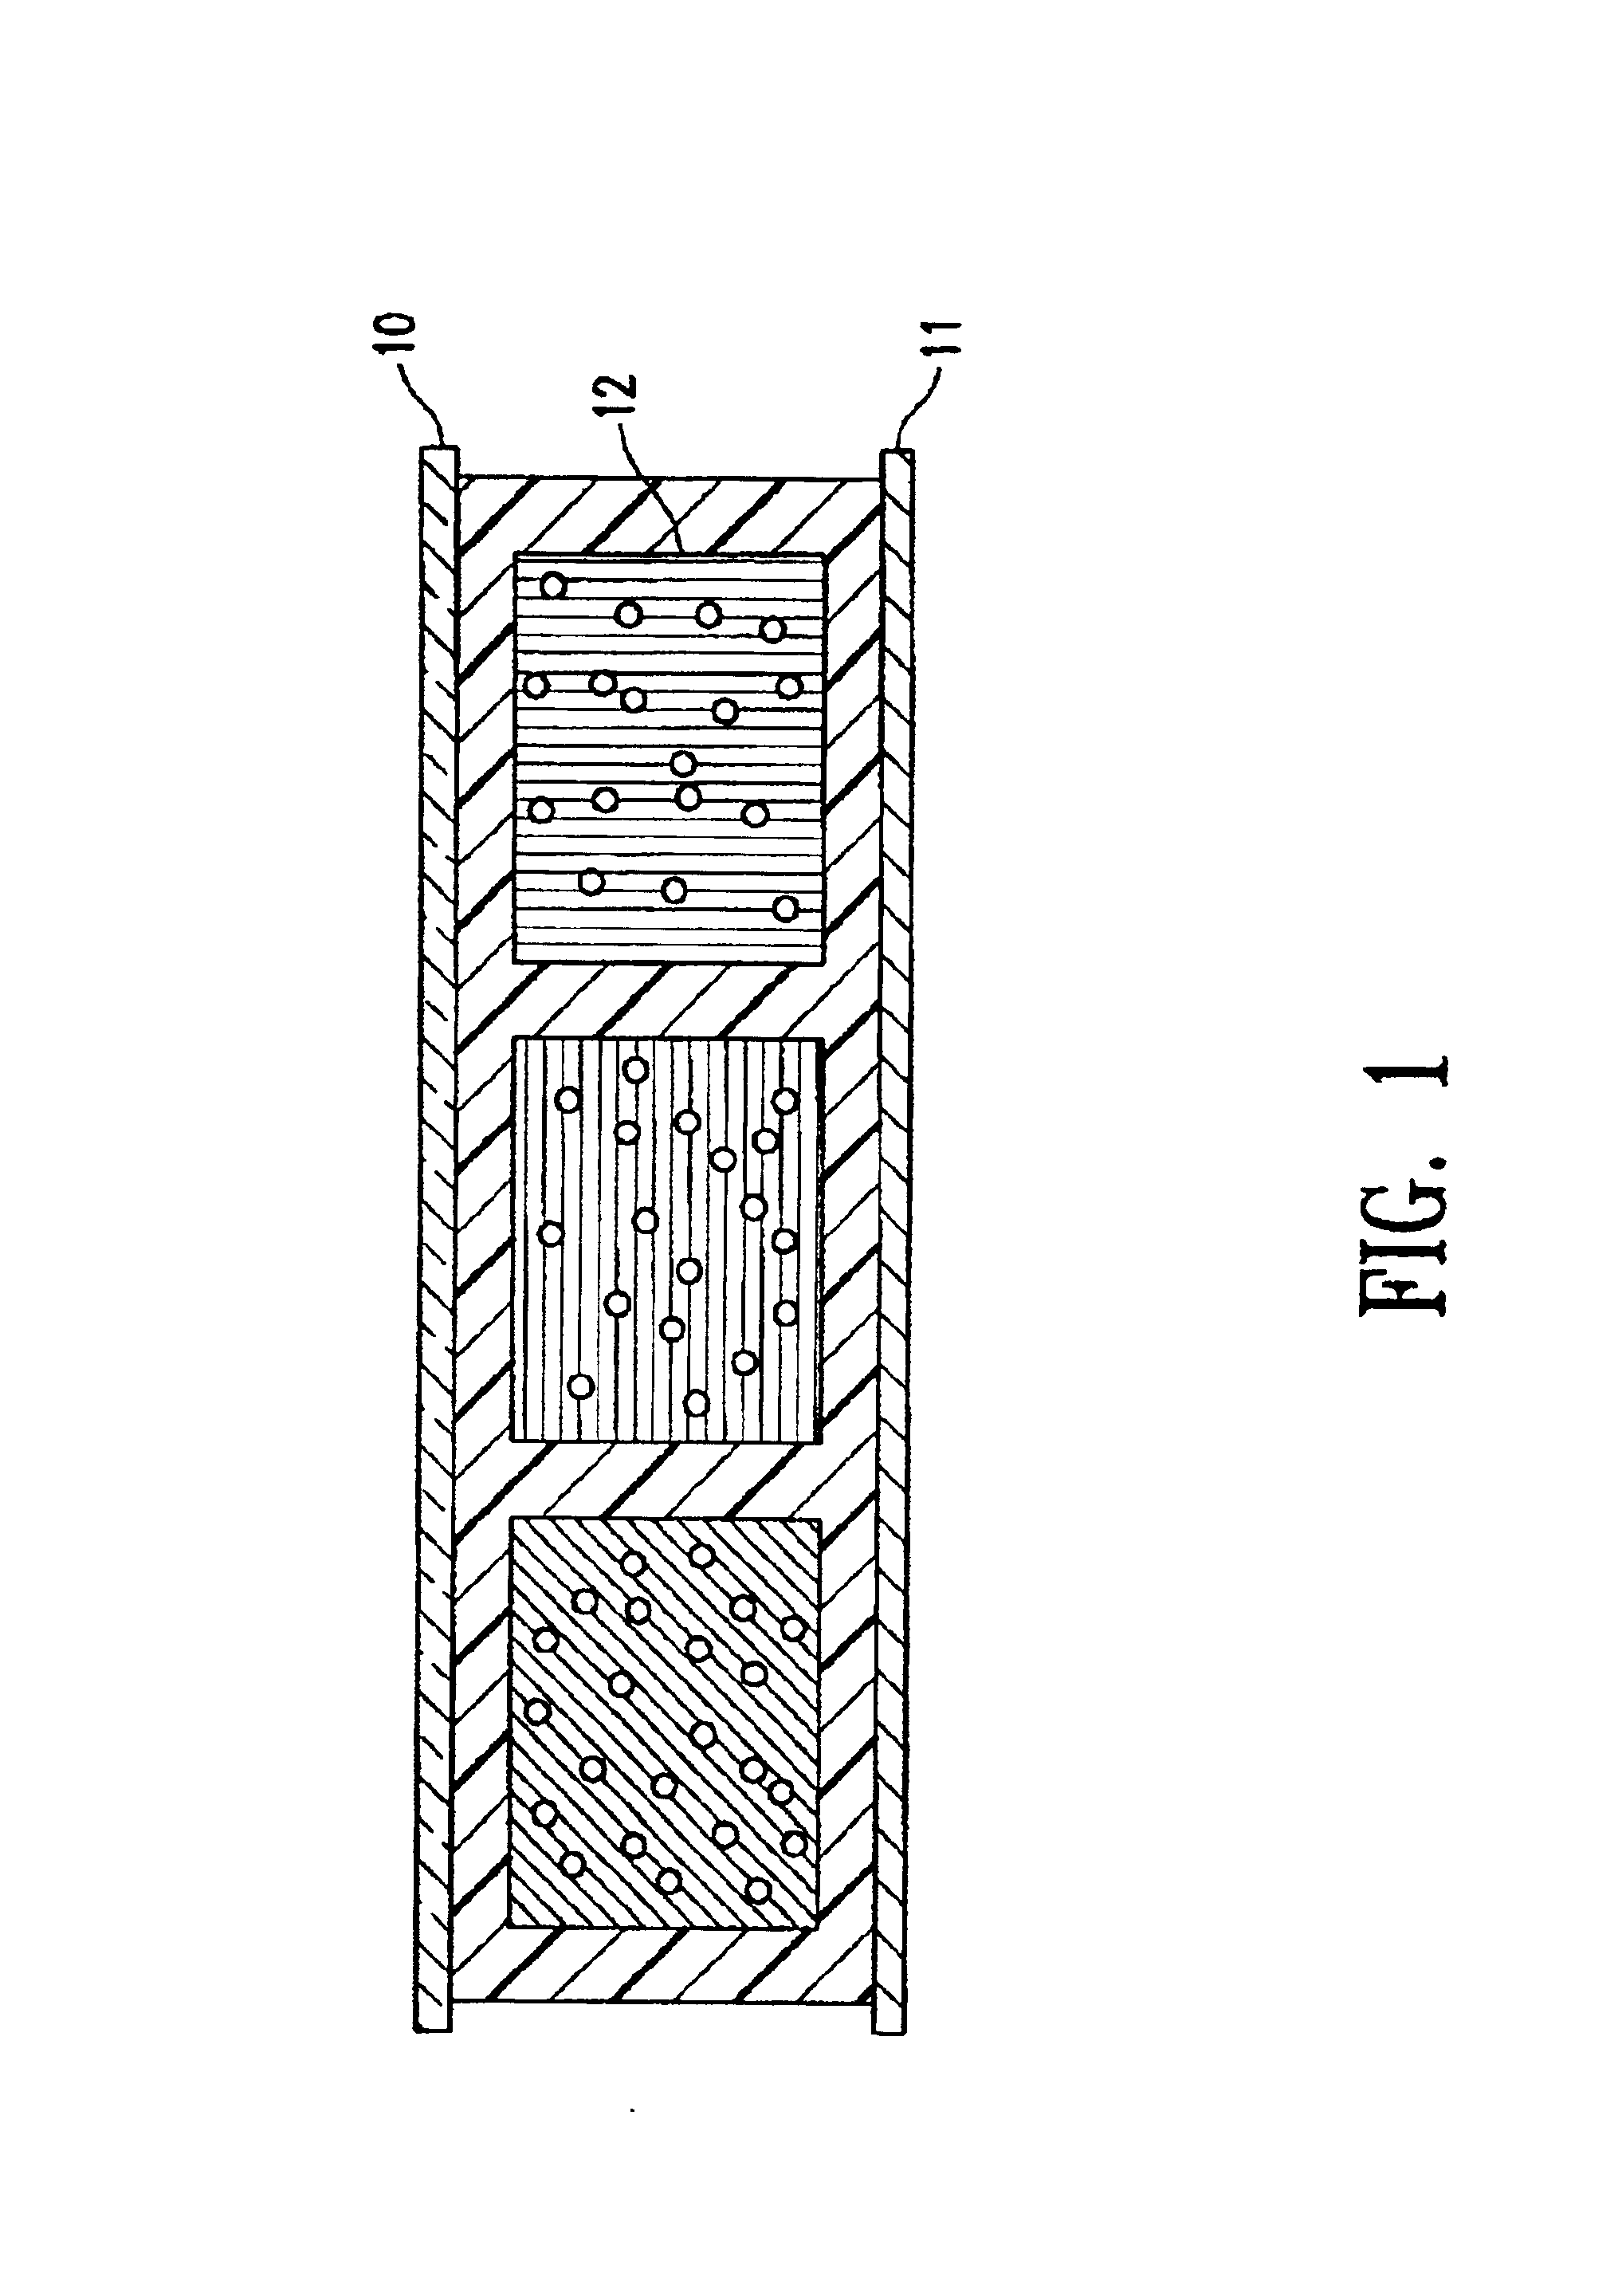 Electrophoretic display and novel process for its manufacture